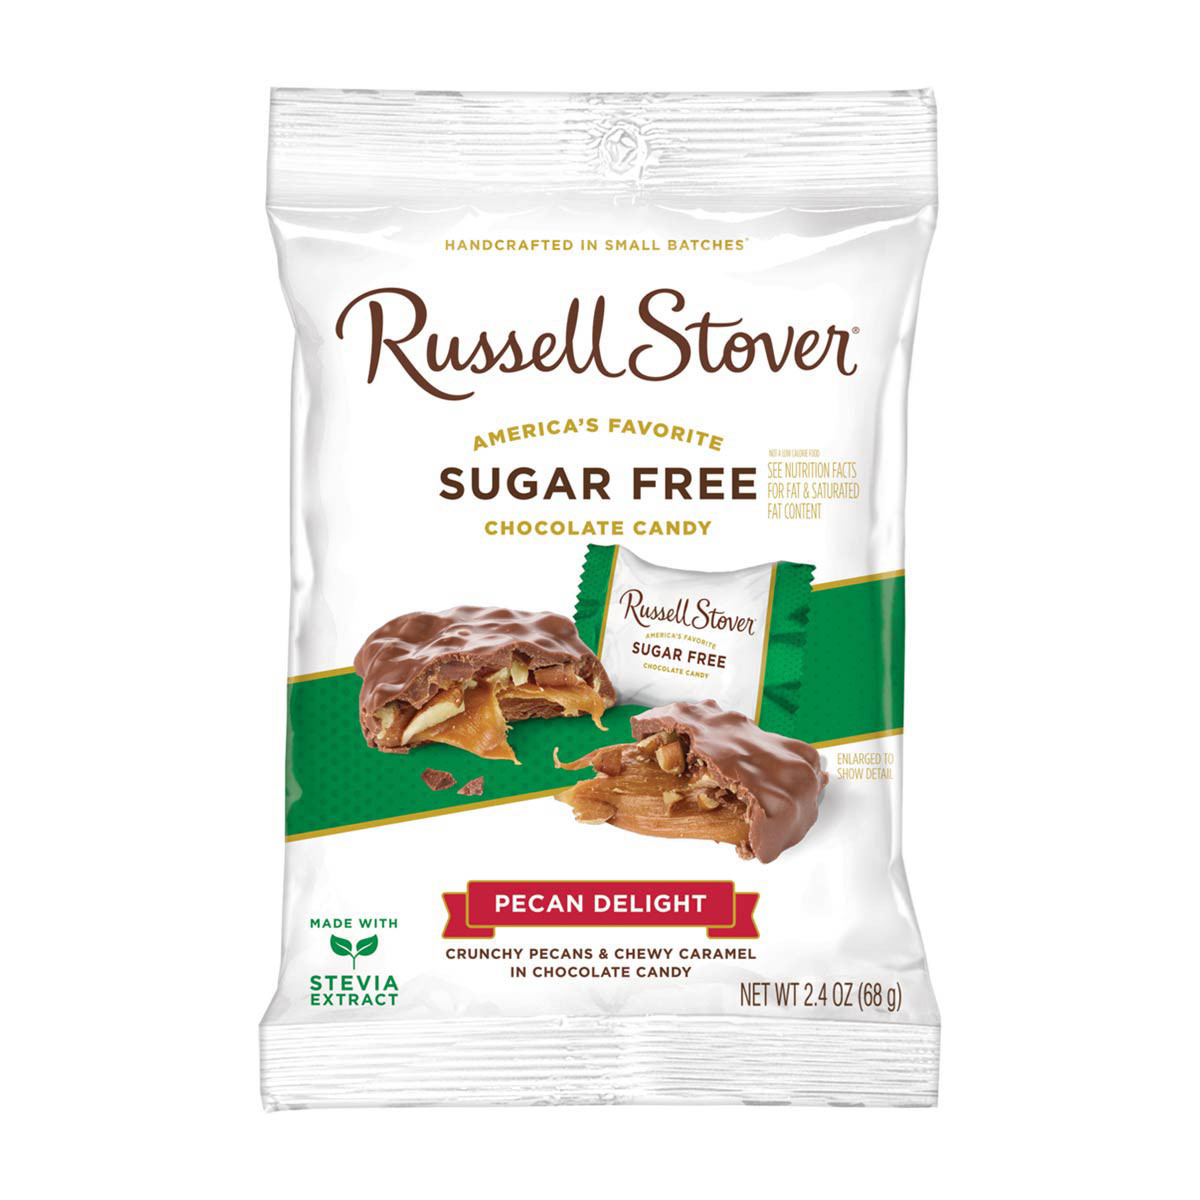 Russell Stover Sugar Free Pecan Delight Chocolate Candy, 2.4 oz